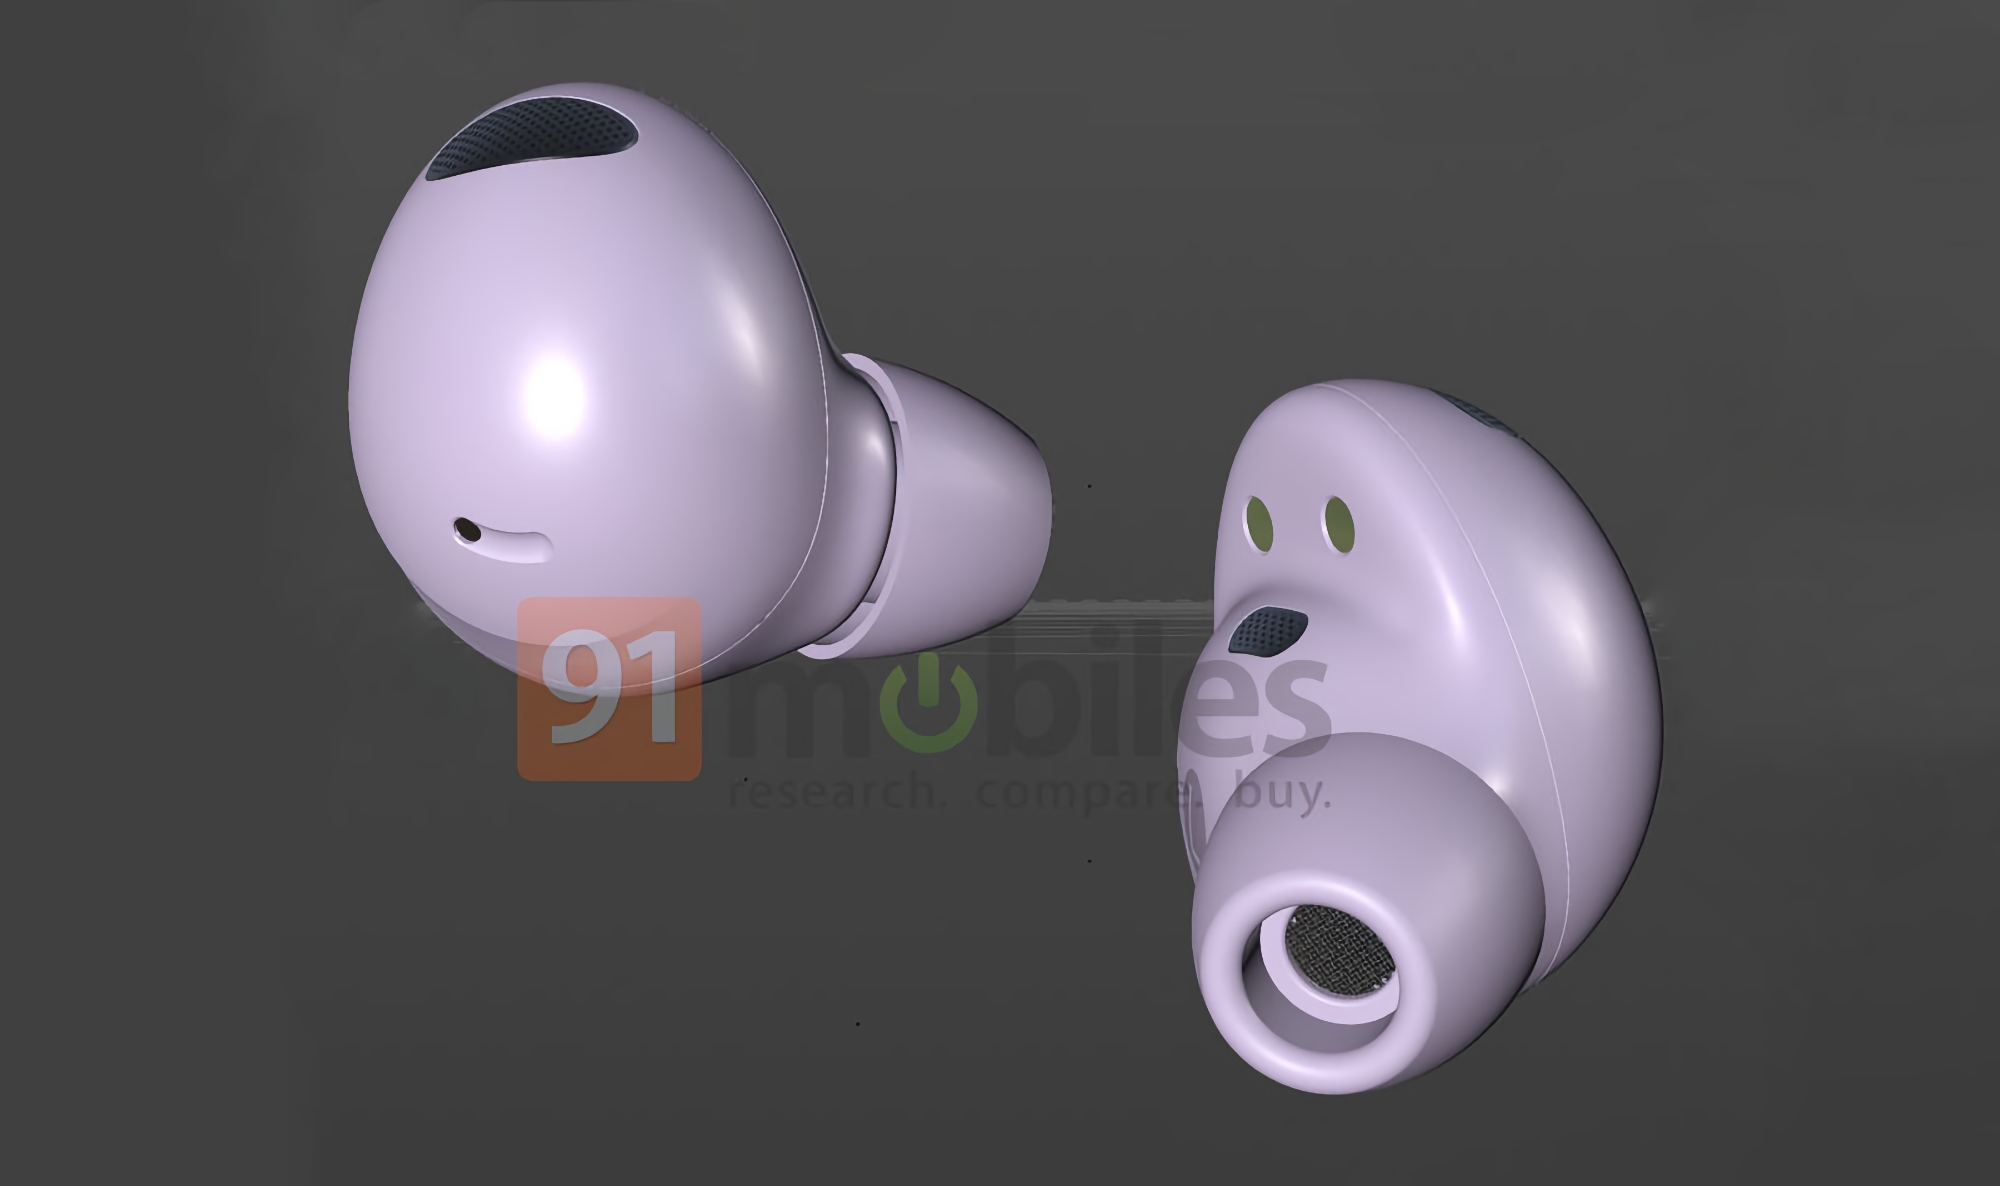 An insider showed what the TWS Samsung Galaxy Buds 2 Pro headphones will look like